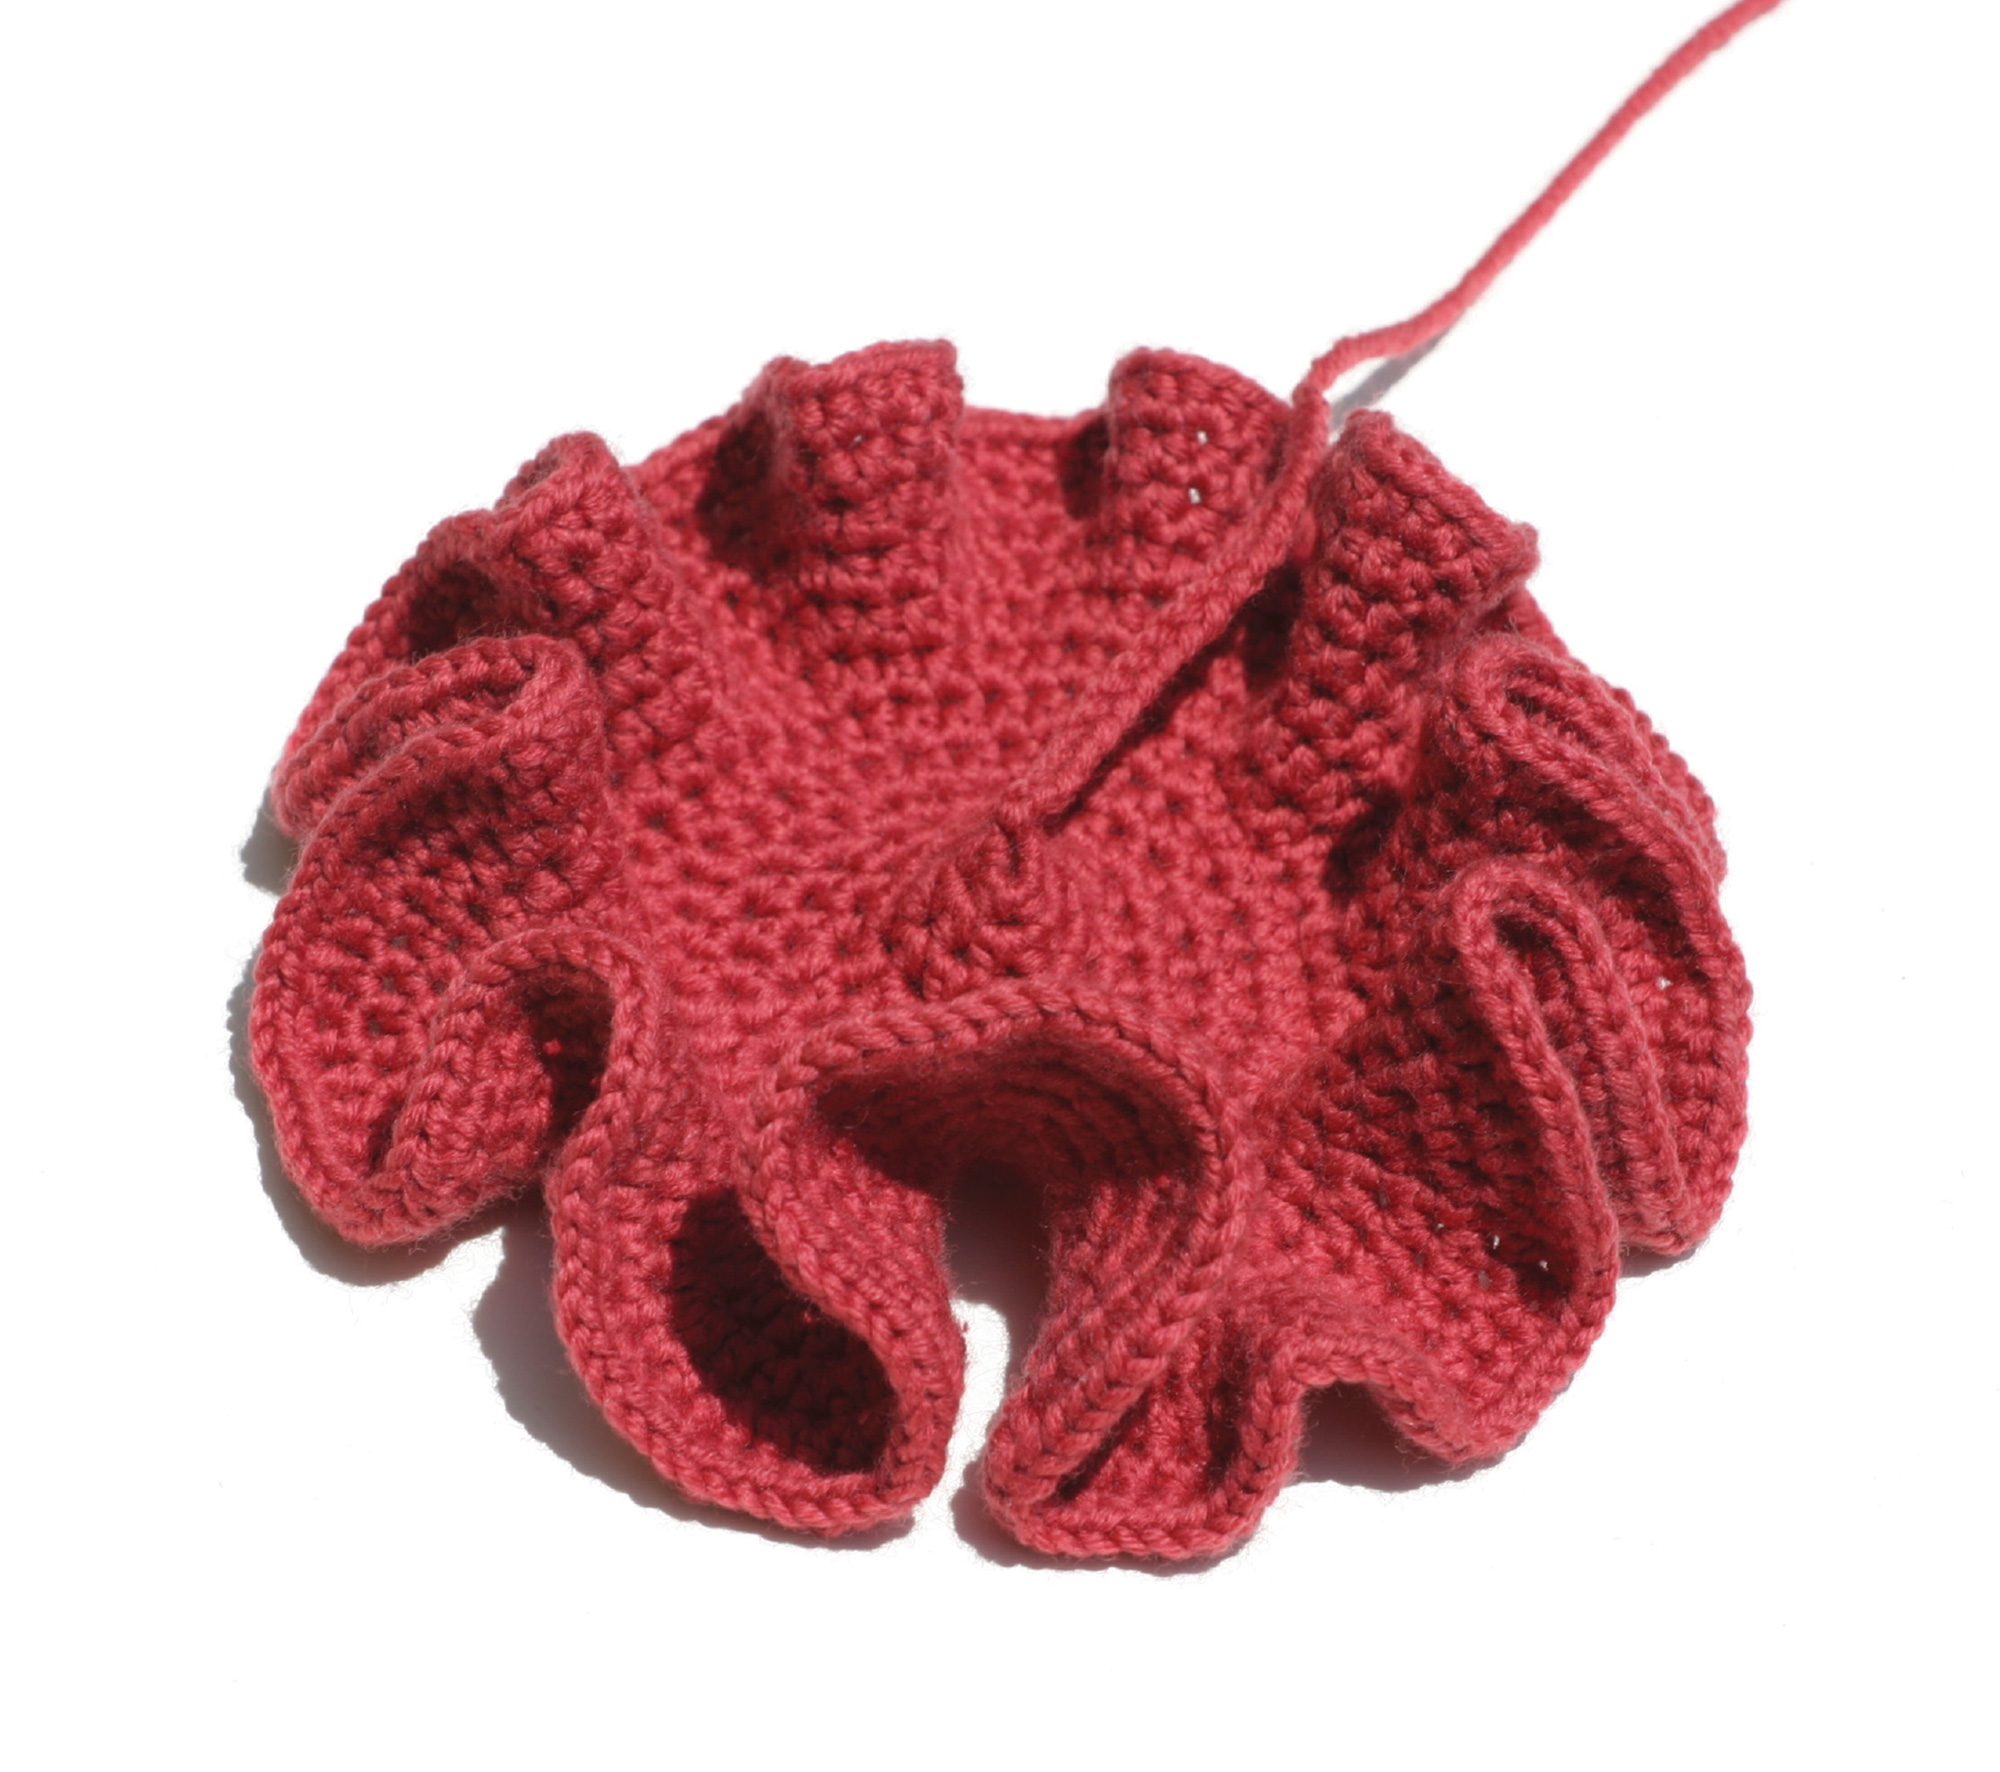 Crocheted model of pseudosphere (the hyperbolic equiavalent of a cone) by Daina Taimina. Photo Steve Rowell. Courtesy The Institute for Figuring.